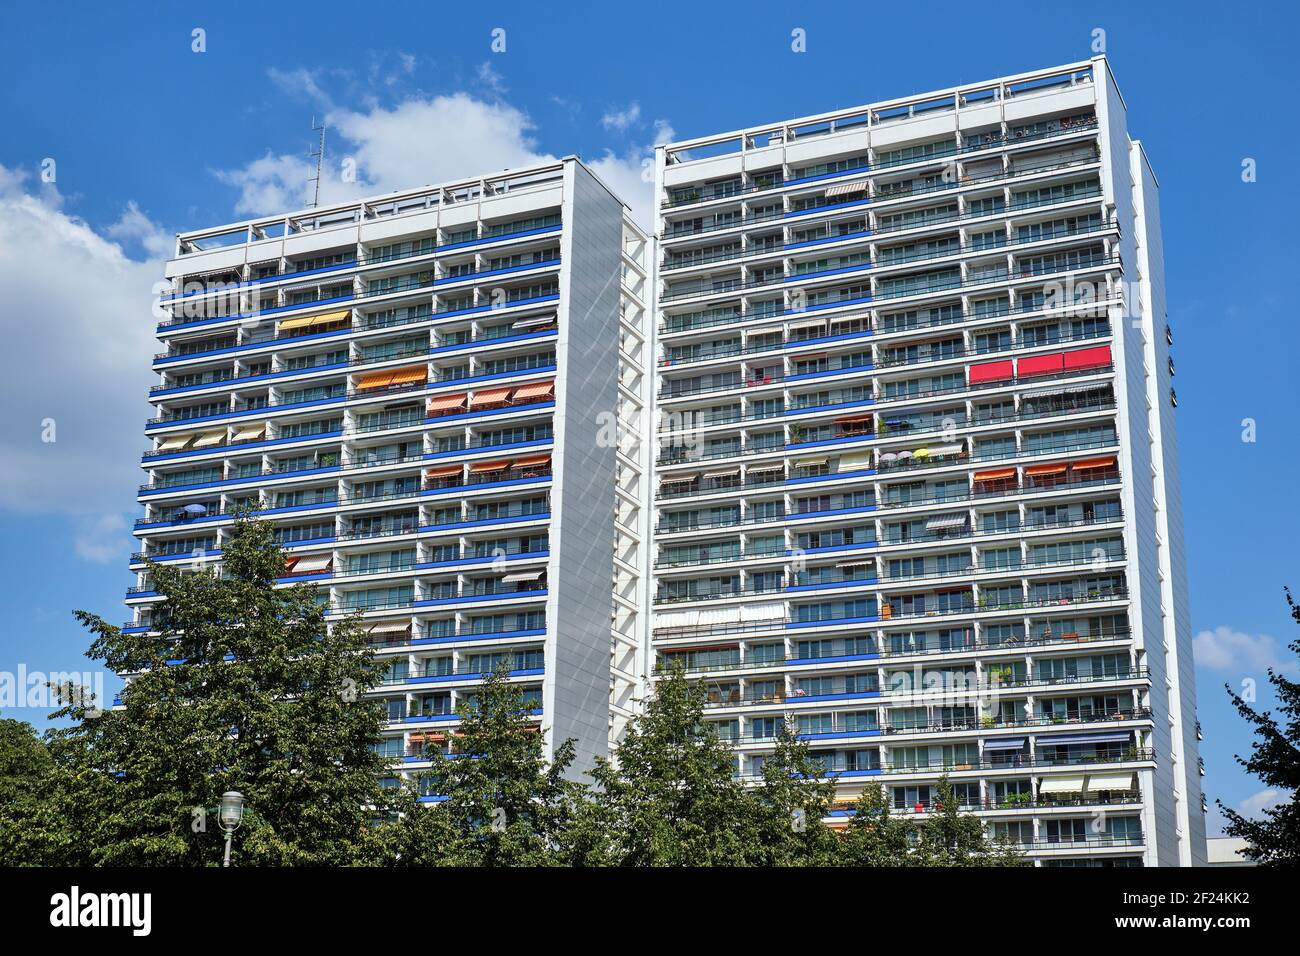 Typical subsidized housing seen in the former eastern part of Berlin Stock Photo